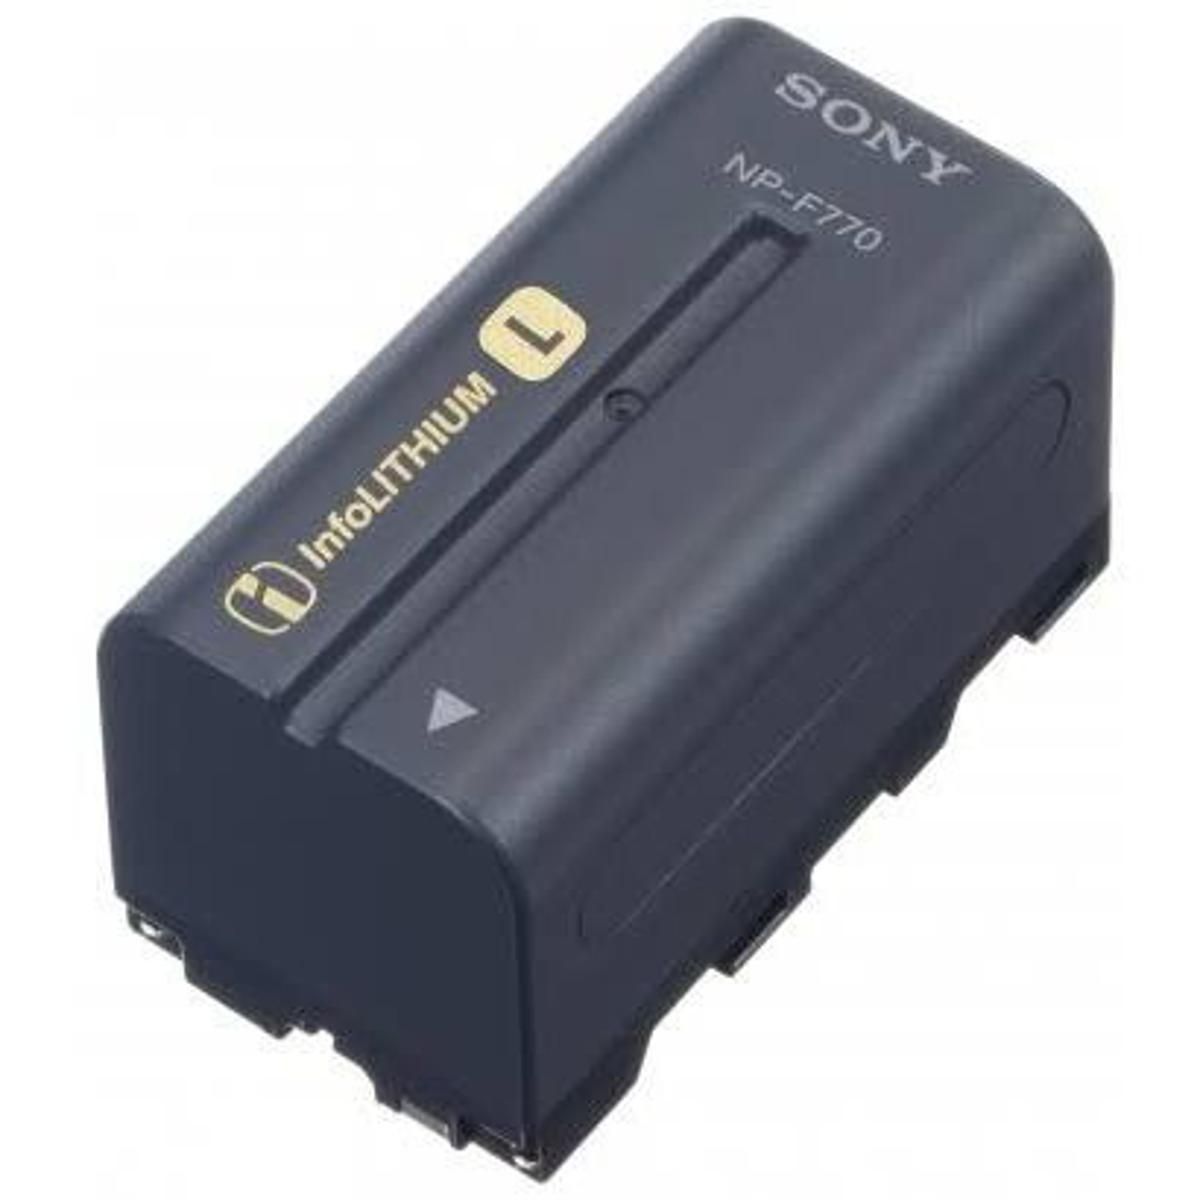 Sony batteries. Sony NP-f770. NP f770 аккумулятор. Sony аккумулятор Sony NP-f770. Аккумулятор Sony NP-f730 / NP-f750 / NP-f770.